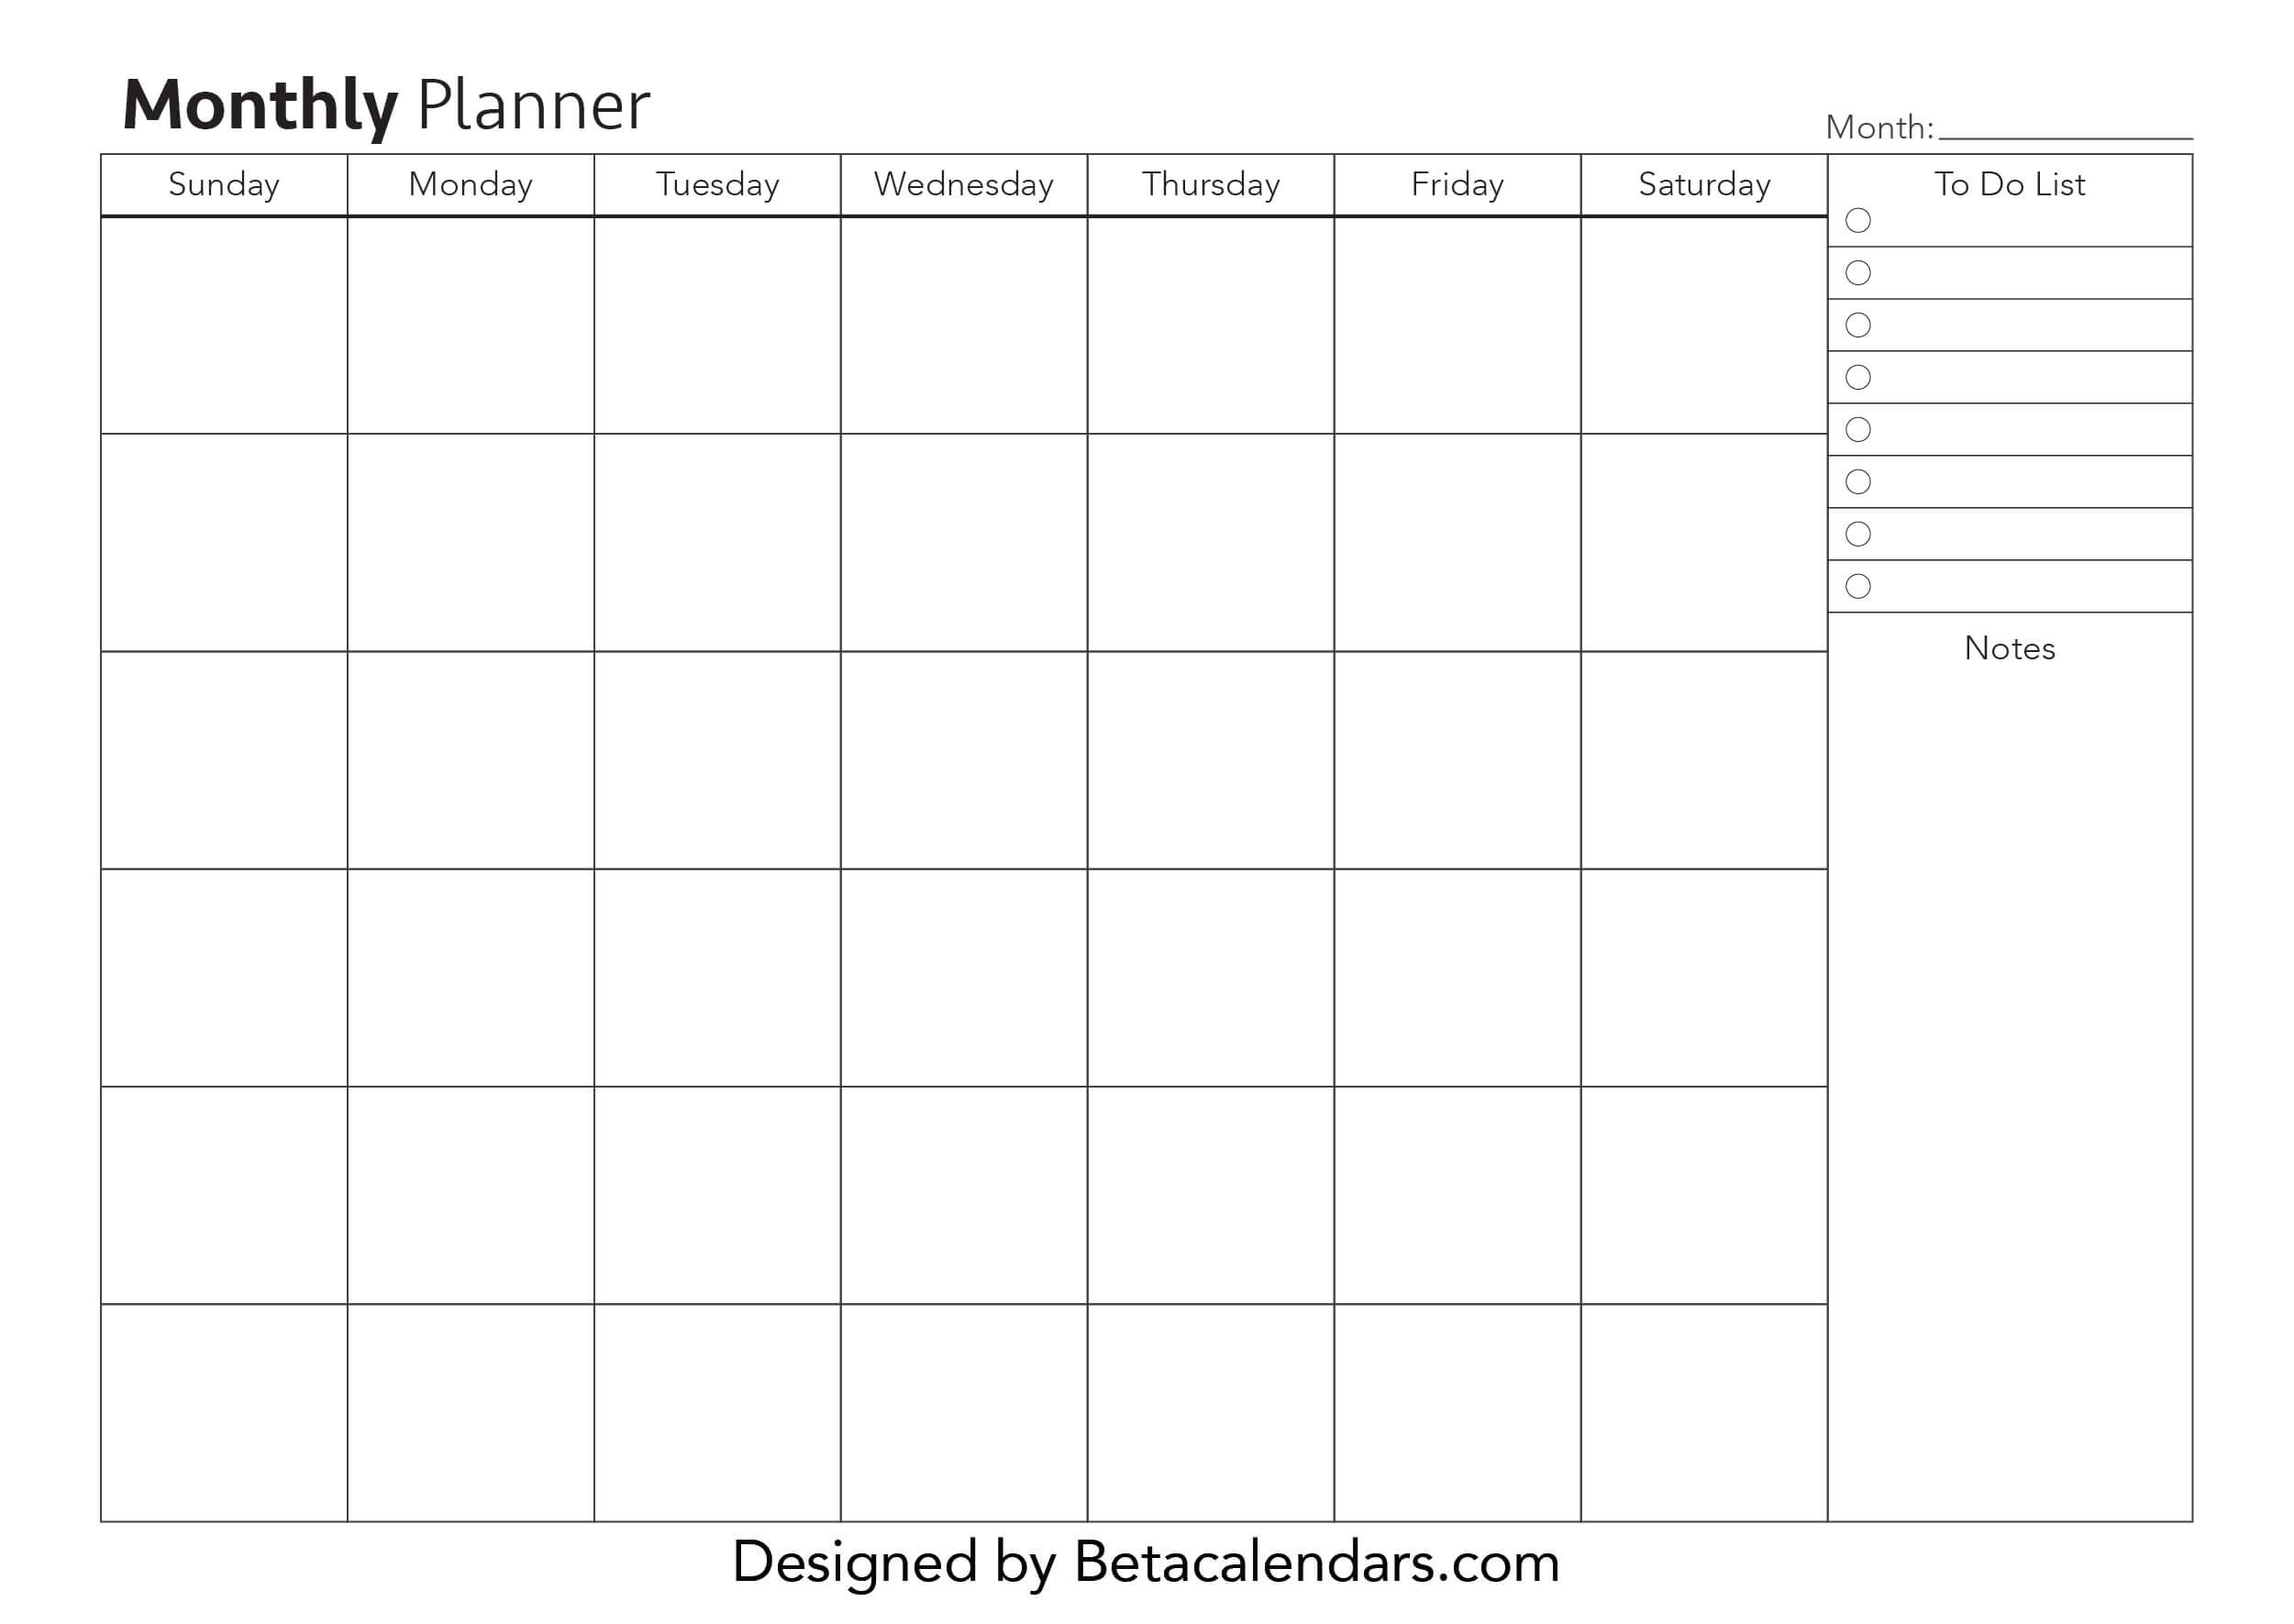 Free Printable Monthly Planner Templates Throughout Month At A Glance Blank Calendar Template